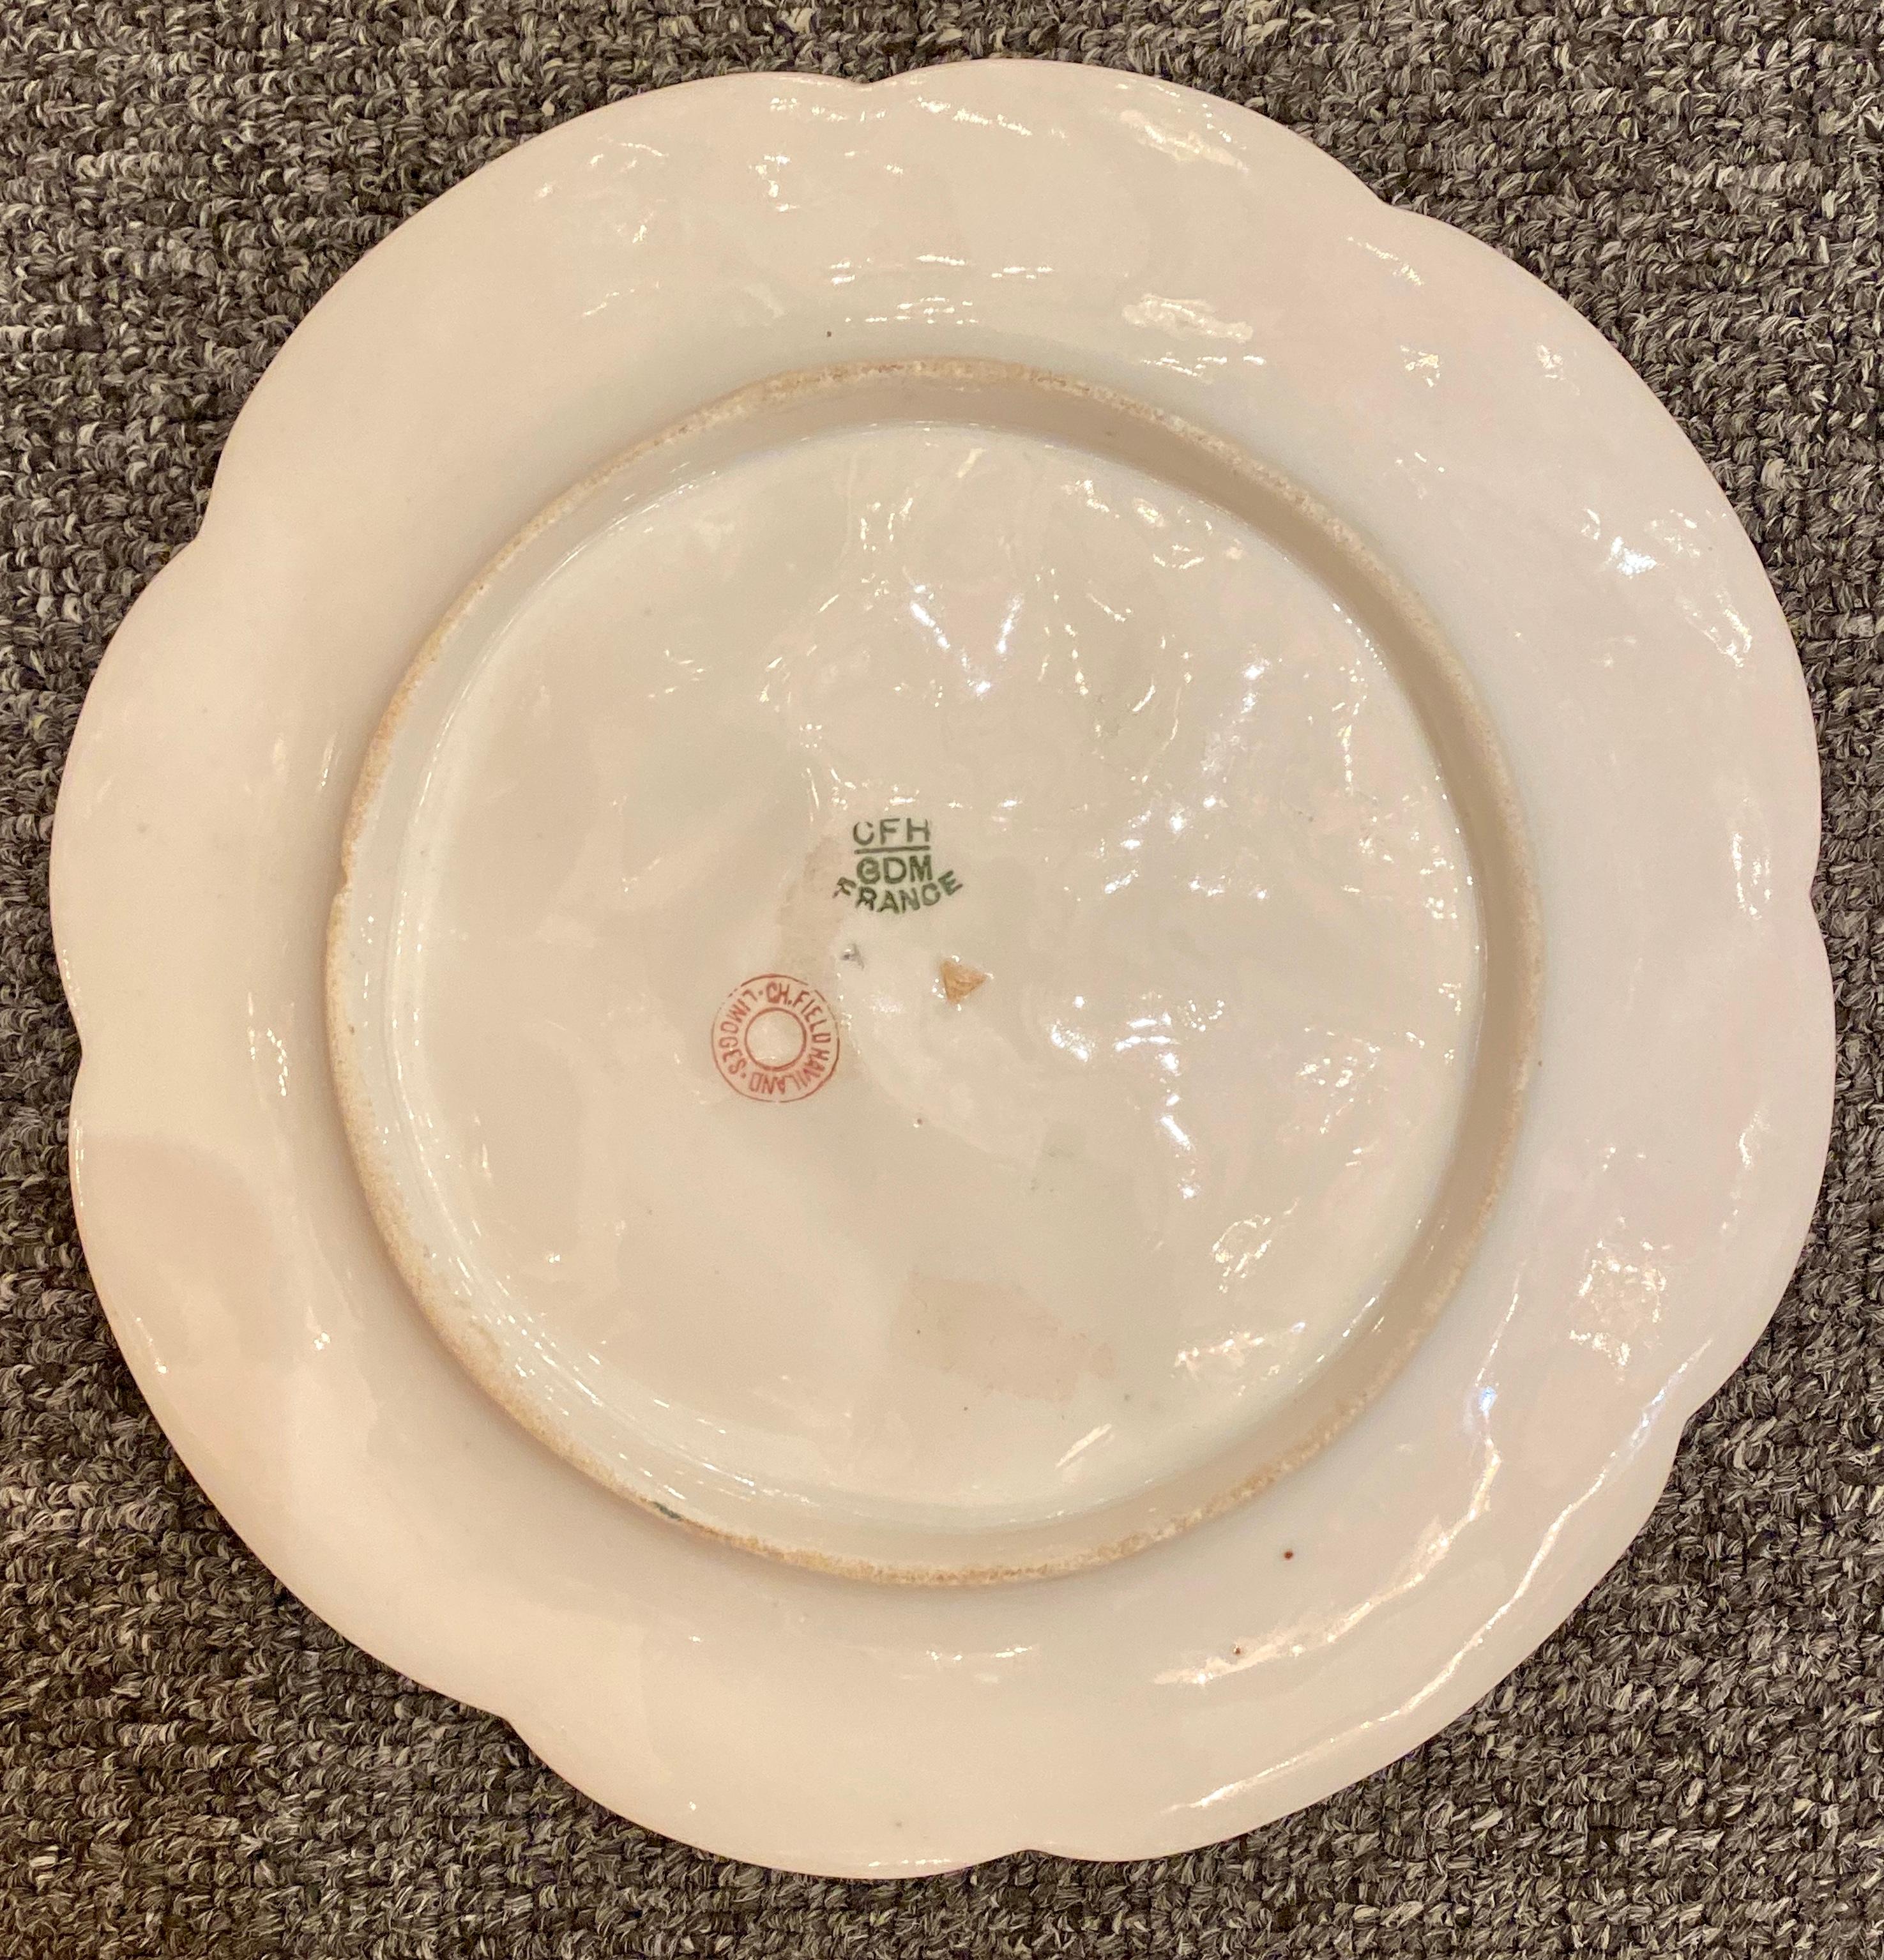 20th Century French Porcelain Oyster Plate, Charles Fields Haviland Limoges, circa 1900